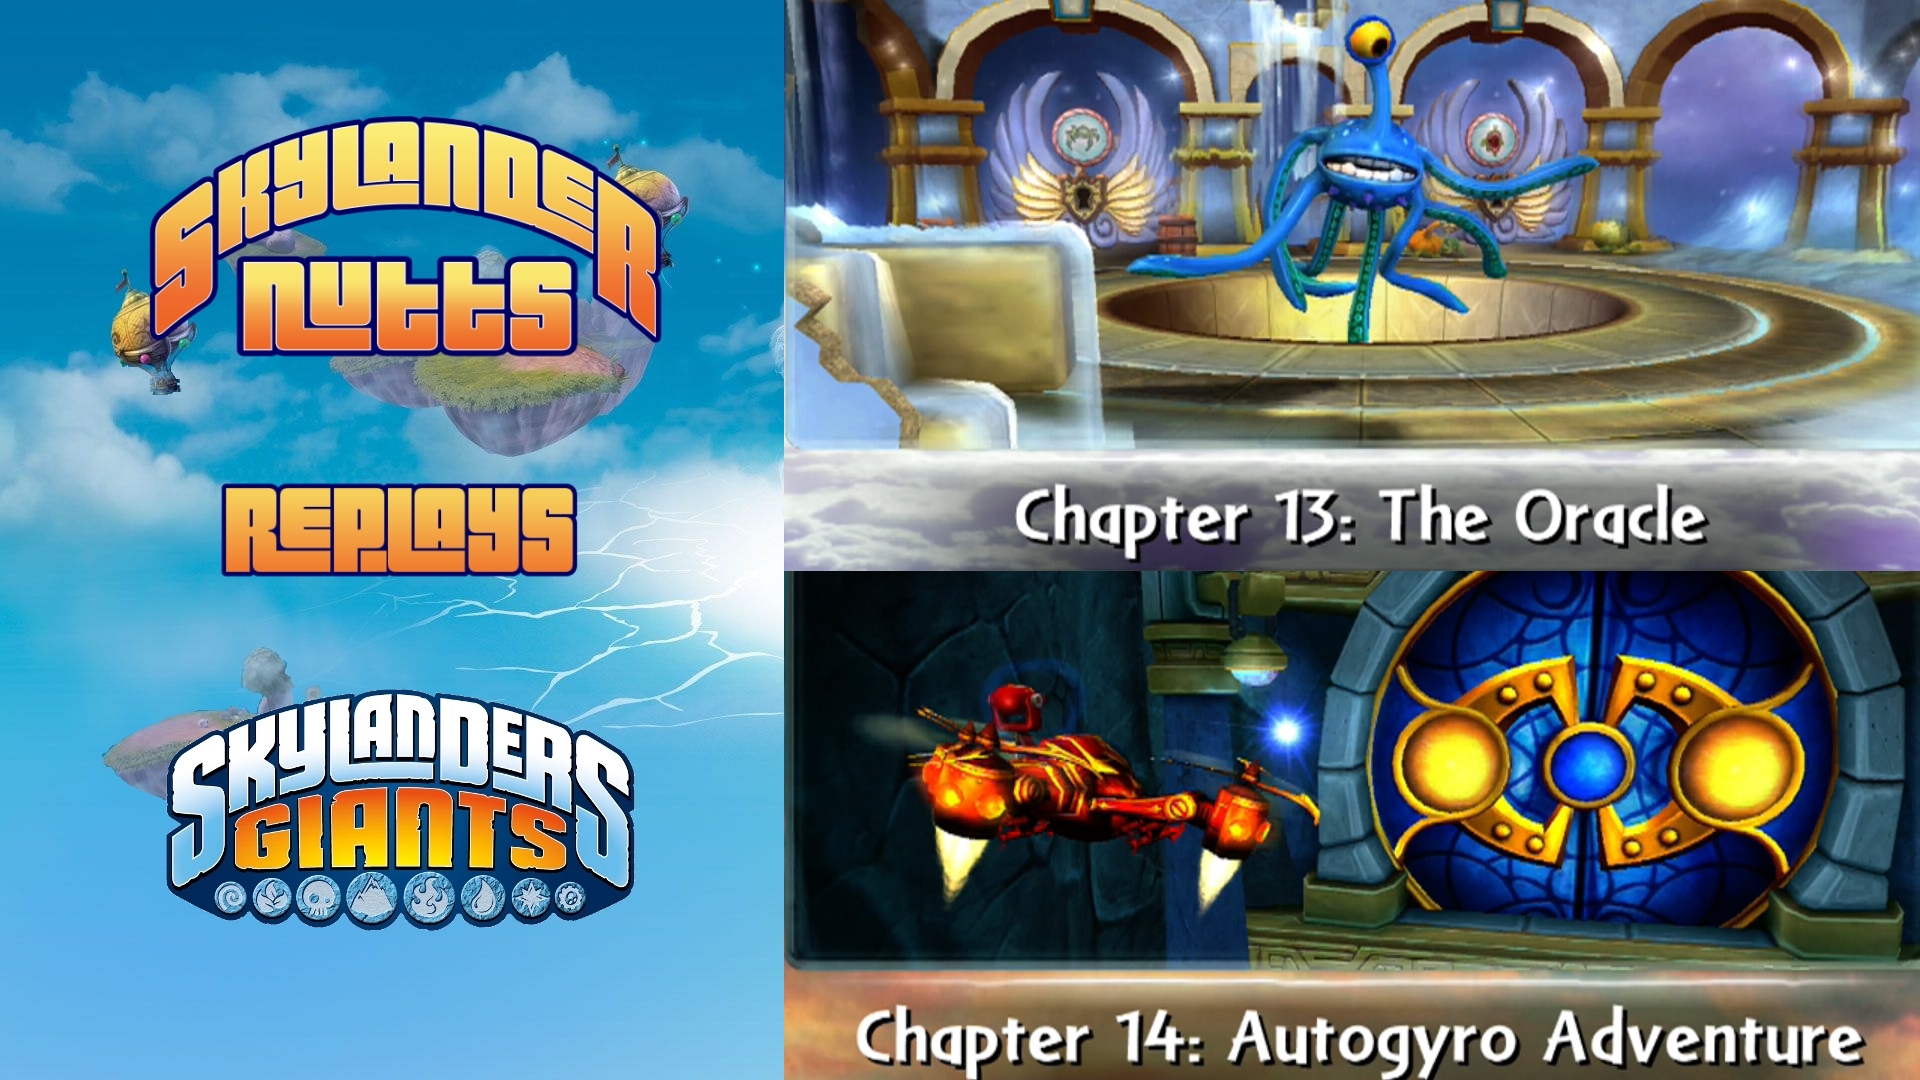 SkylanderNutts Replays Giants (Ch 13 - The Oracle and Ch 14 - Autogyro Adventure)